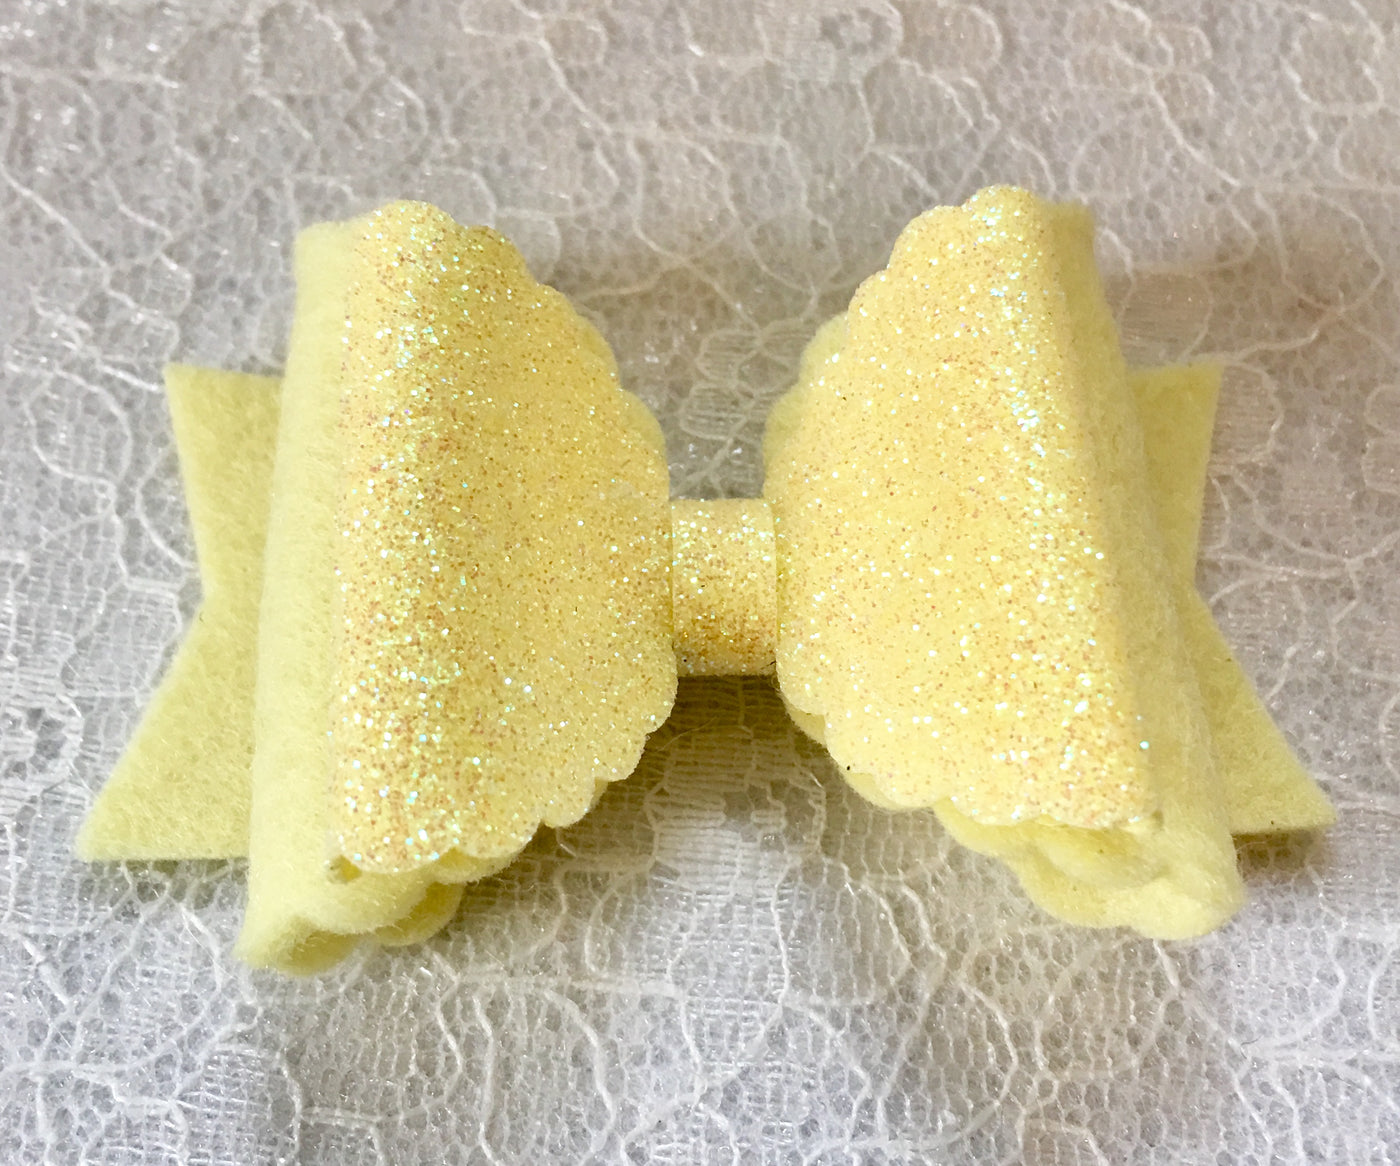 NEW 3" and 4" Felt Better Scalloped Dolly Bow Die